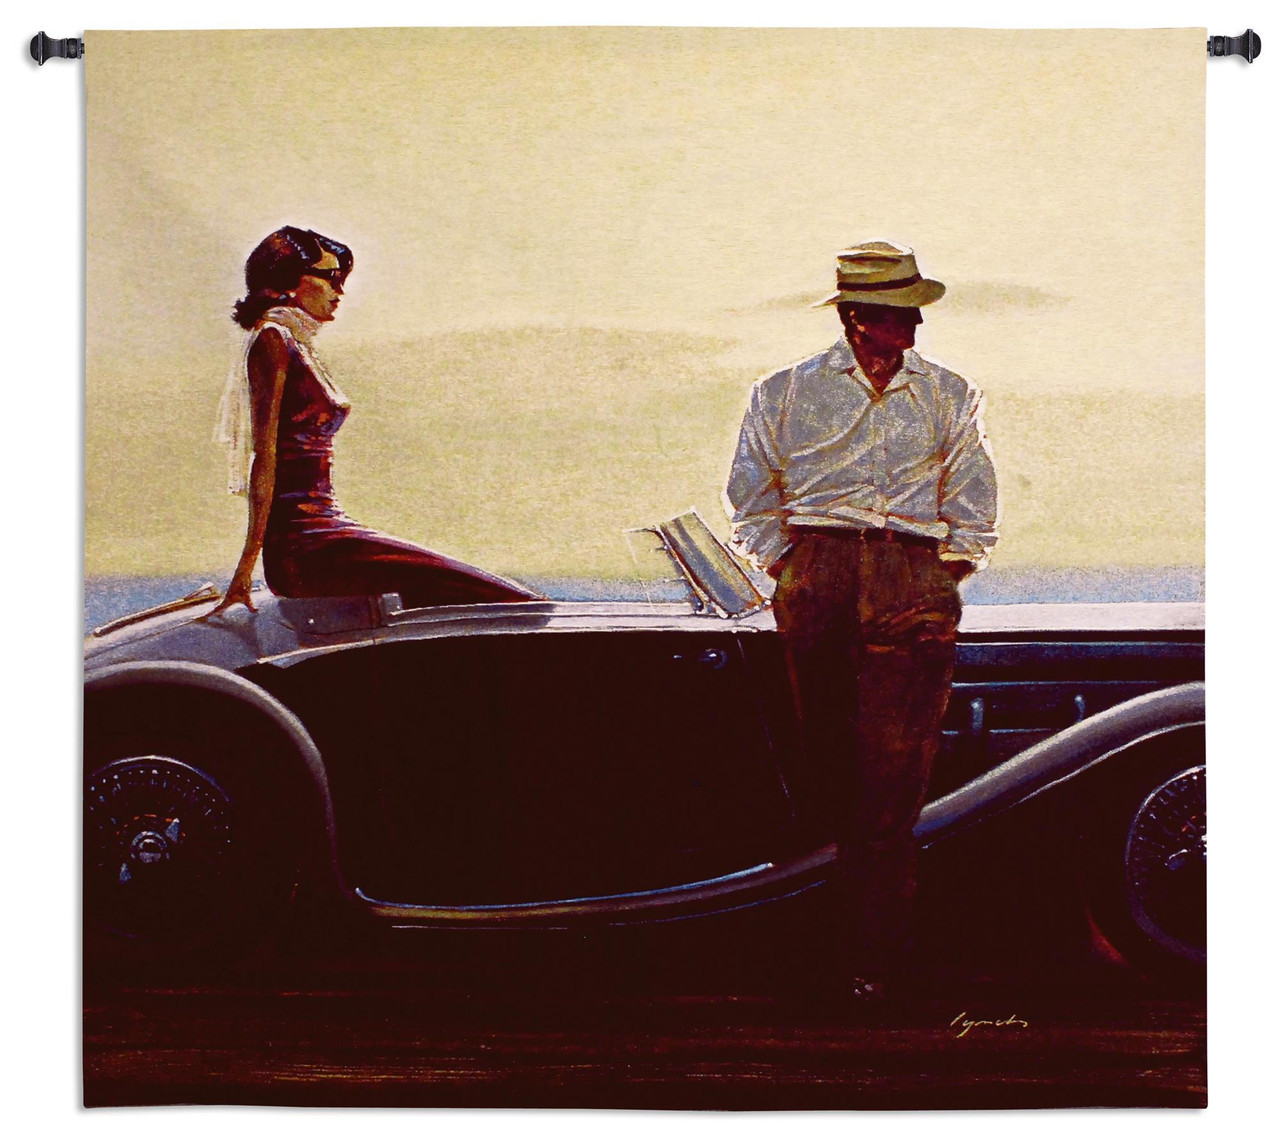 Coastal Drive by Brent Lynch Woven Tapestry Wall Art Hanging Vintage  Romantic Road Trip in Stylish Roadster 100% Cotton USA Size 52x51